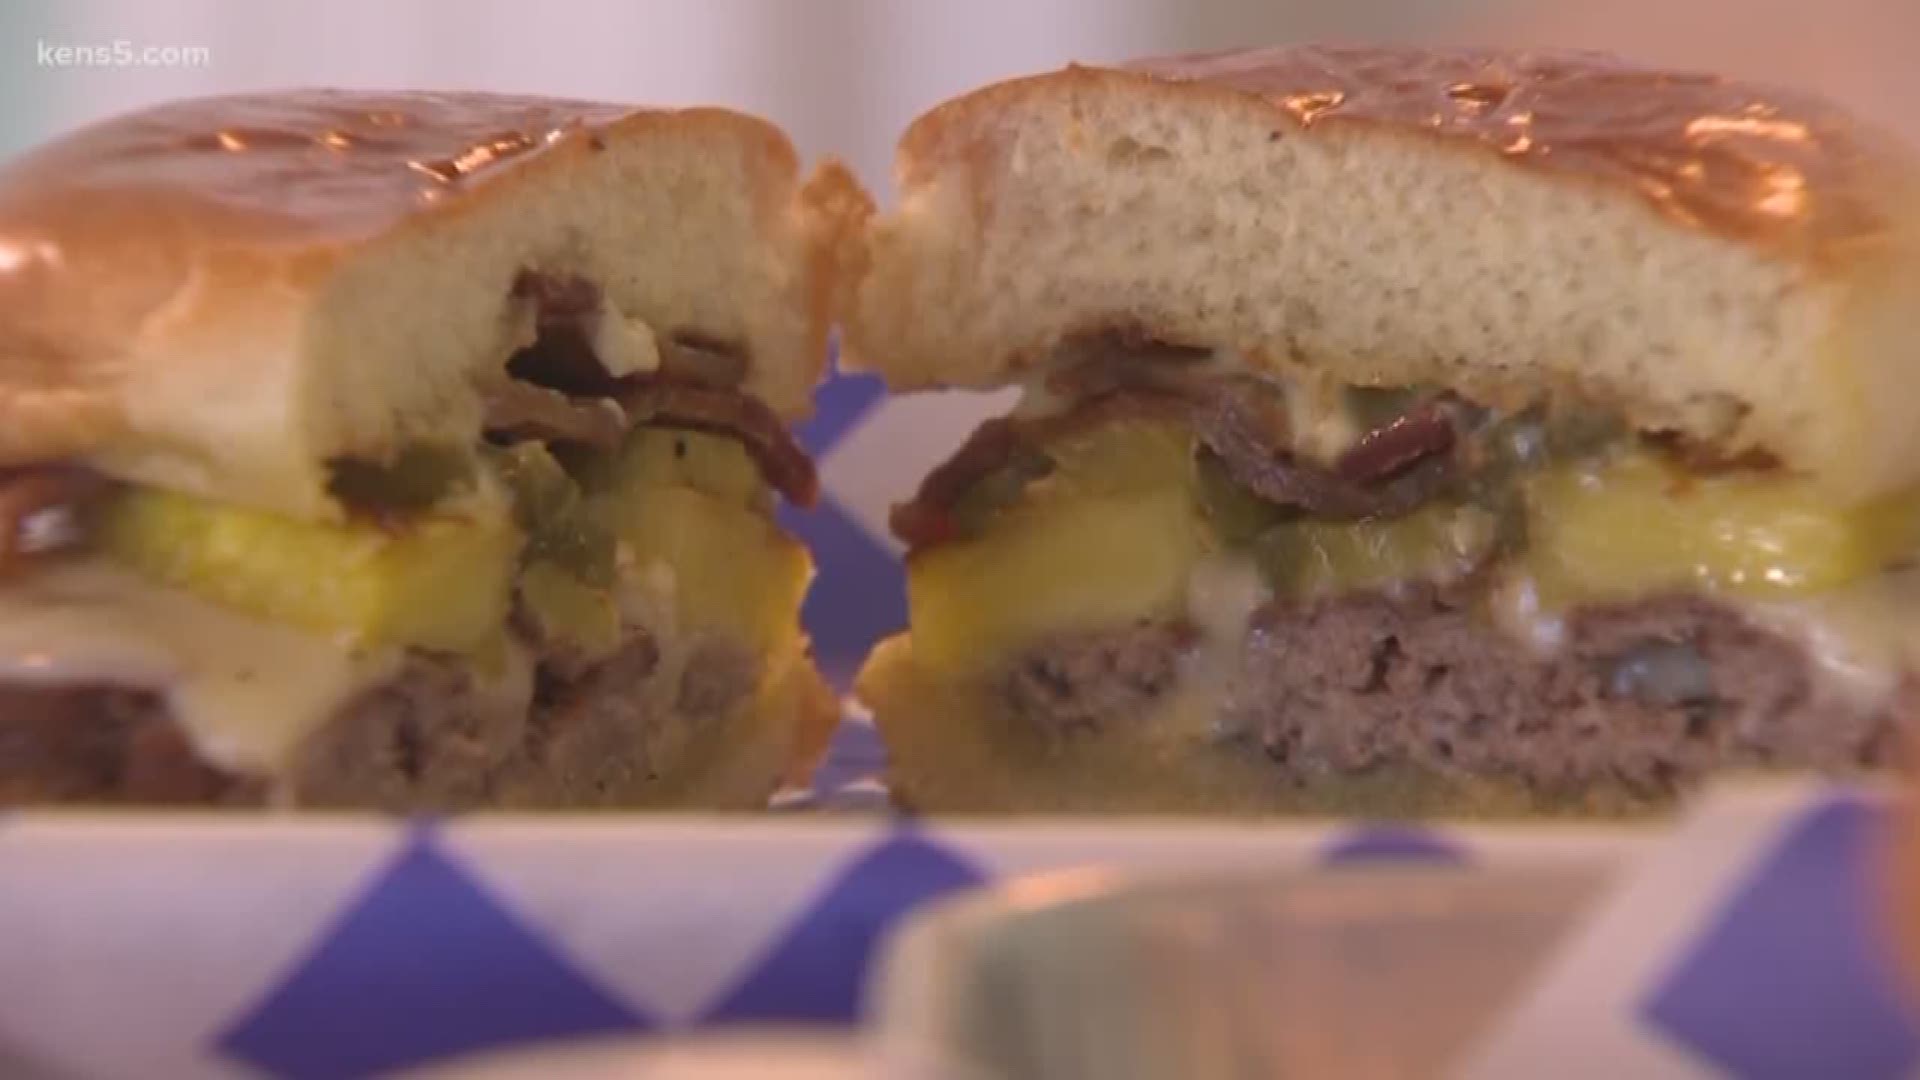 KENS 5's Marvin Hurst tries the delights at Tin Top Burgers and Beer in New Braunfels in this week's Neighborhood Eats.